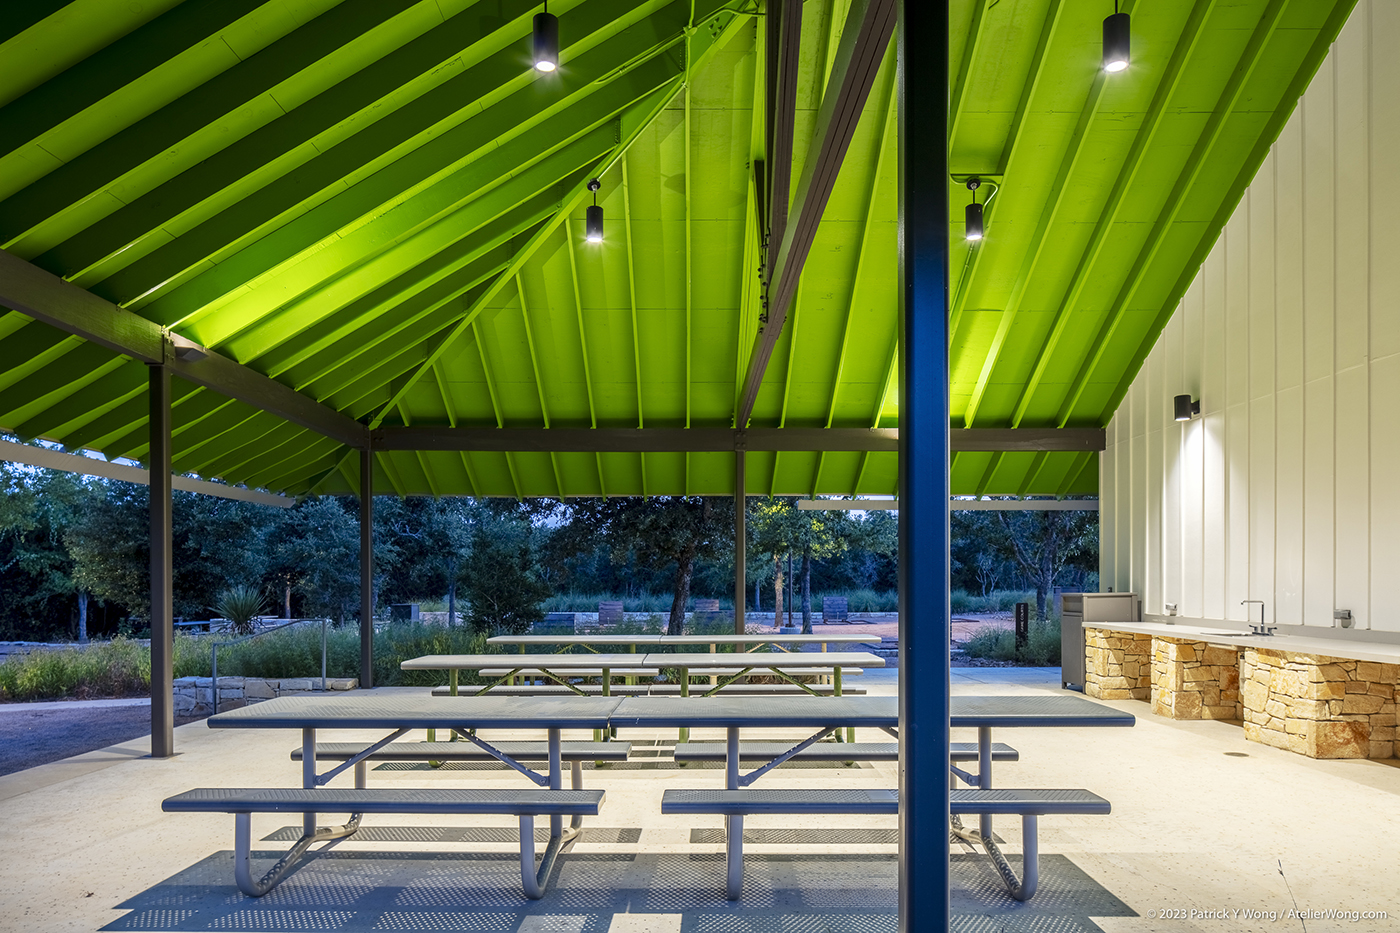 Outdoor picnic tables under a brightly lit roof at dusk.